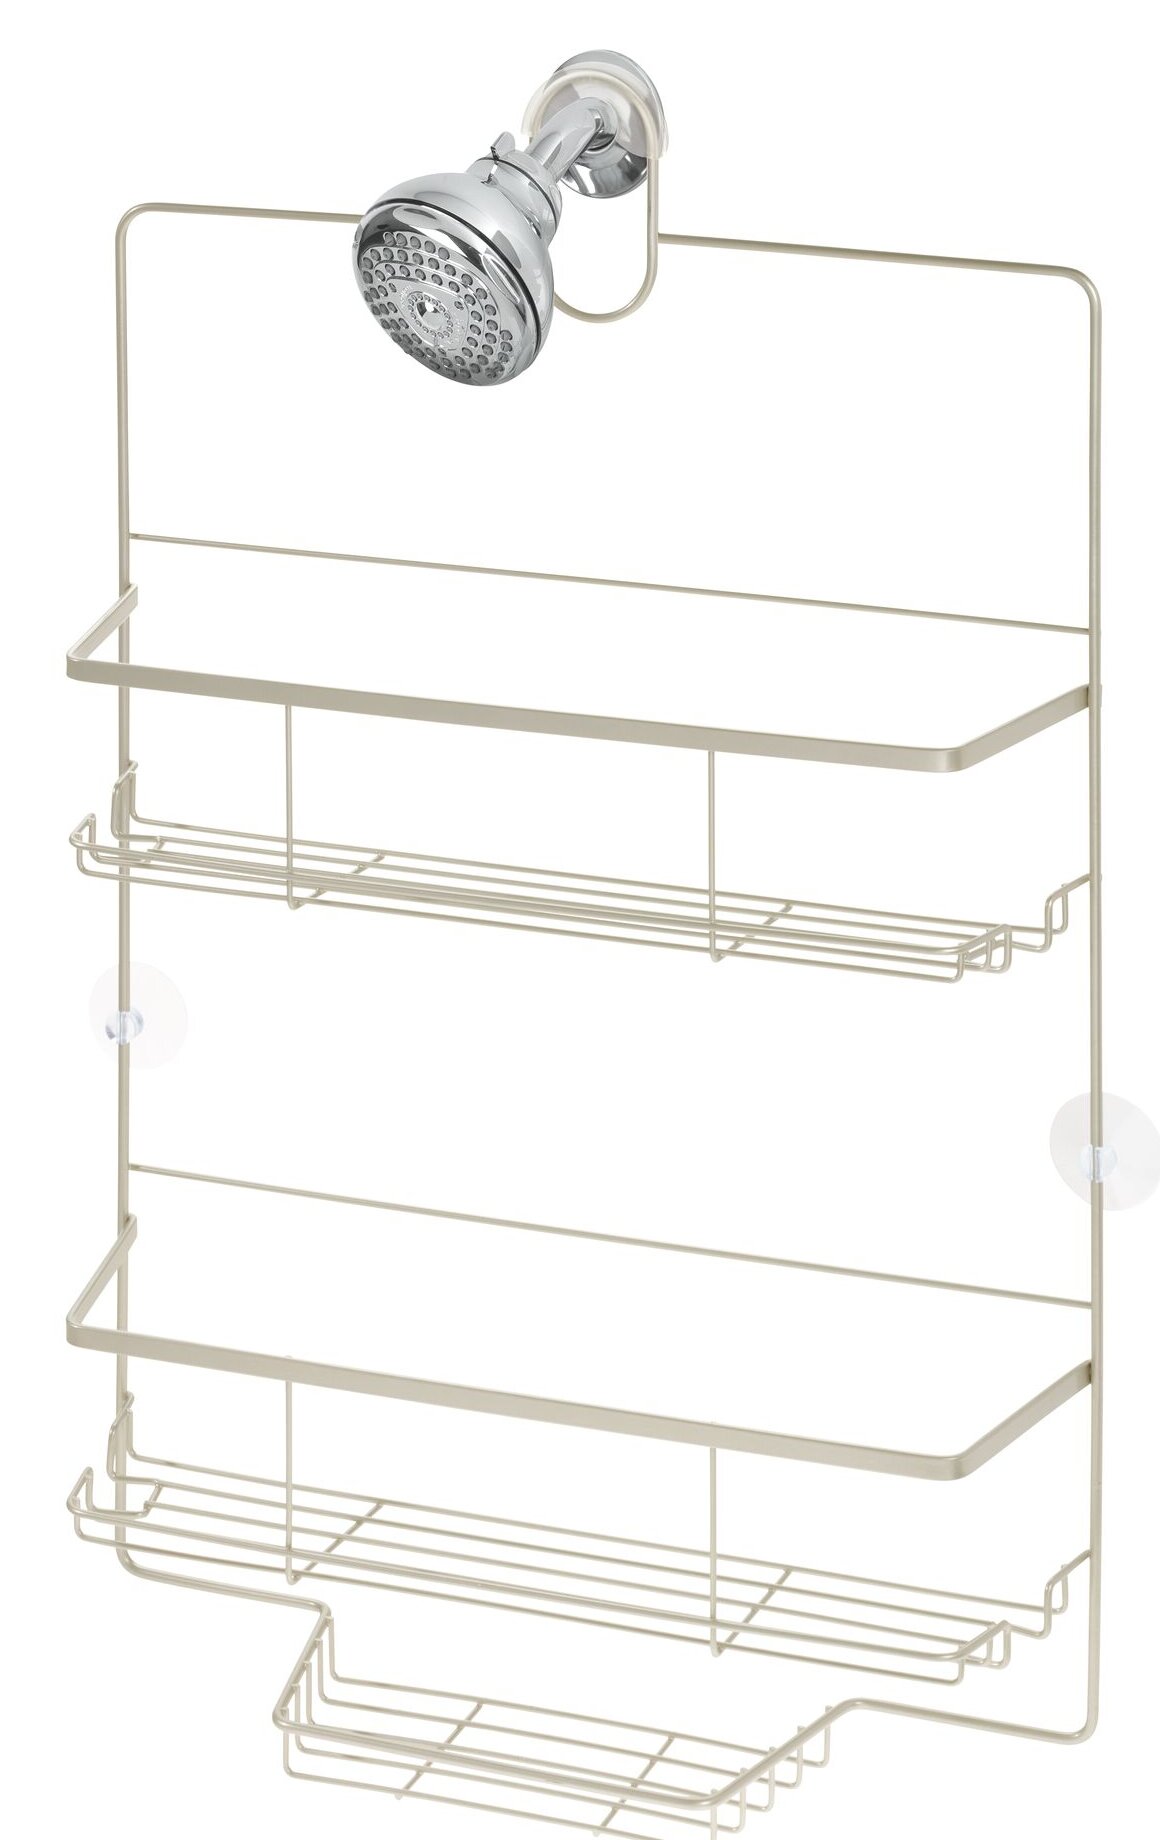 Stickland Hanging Stainless Steel Shower Caddy